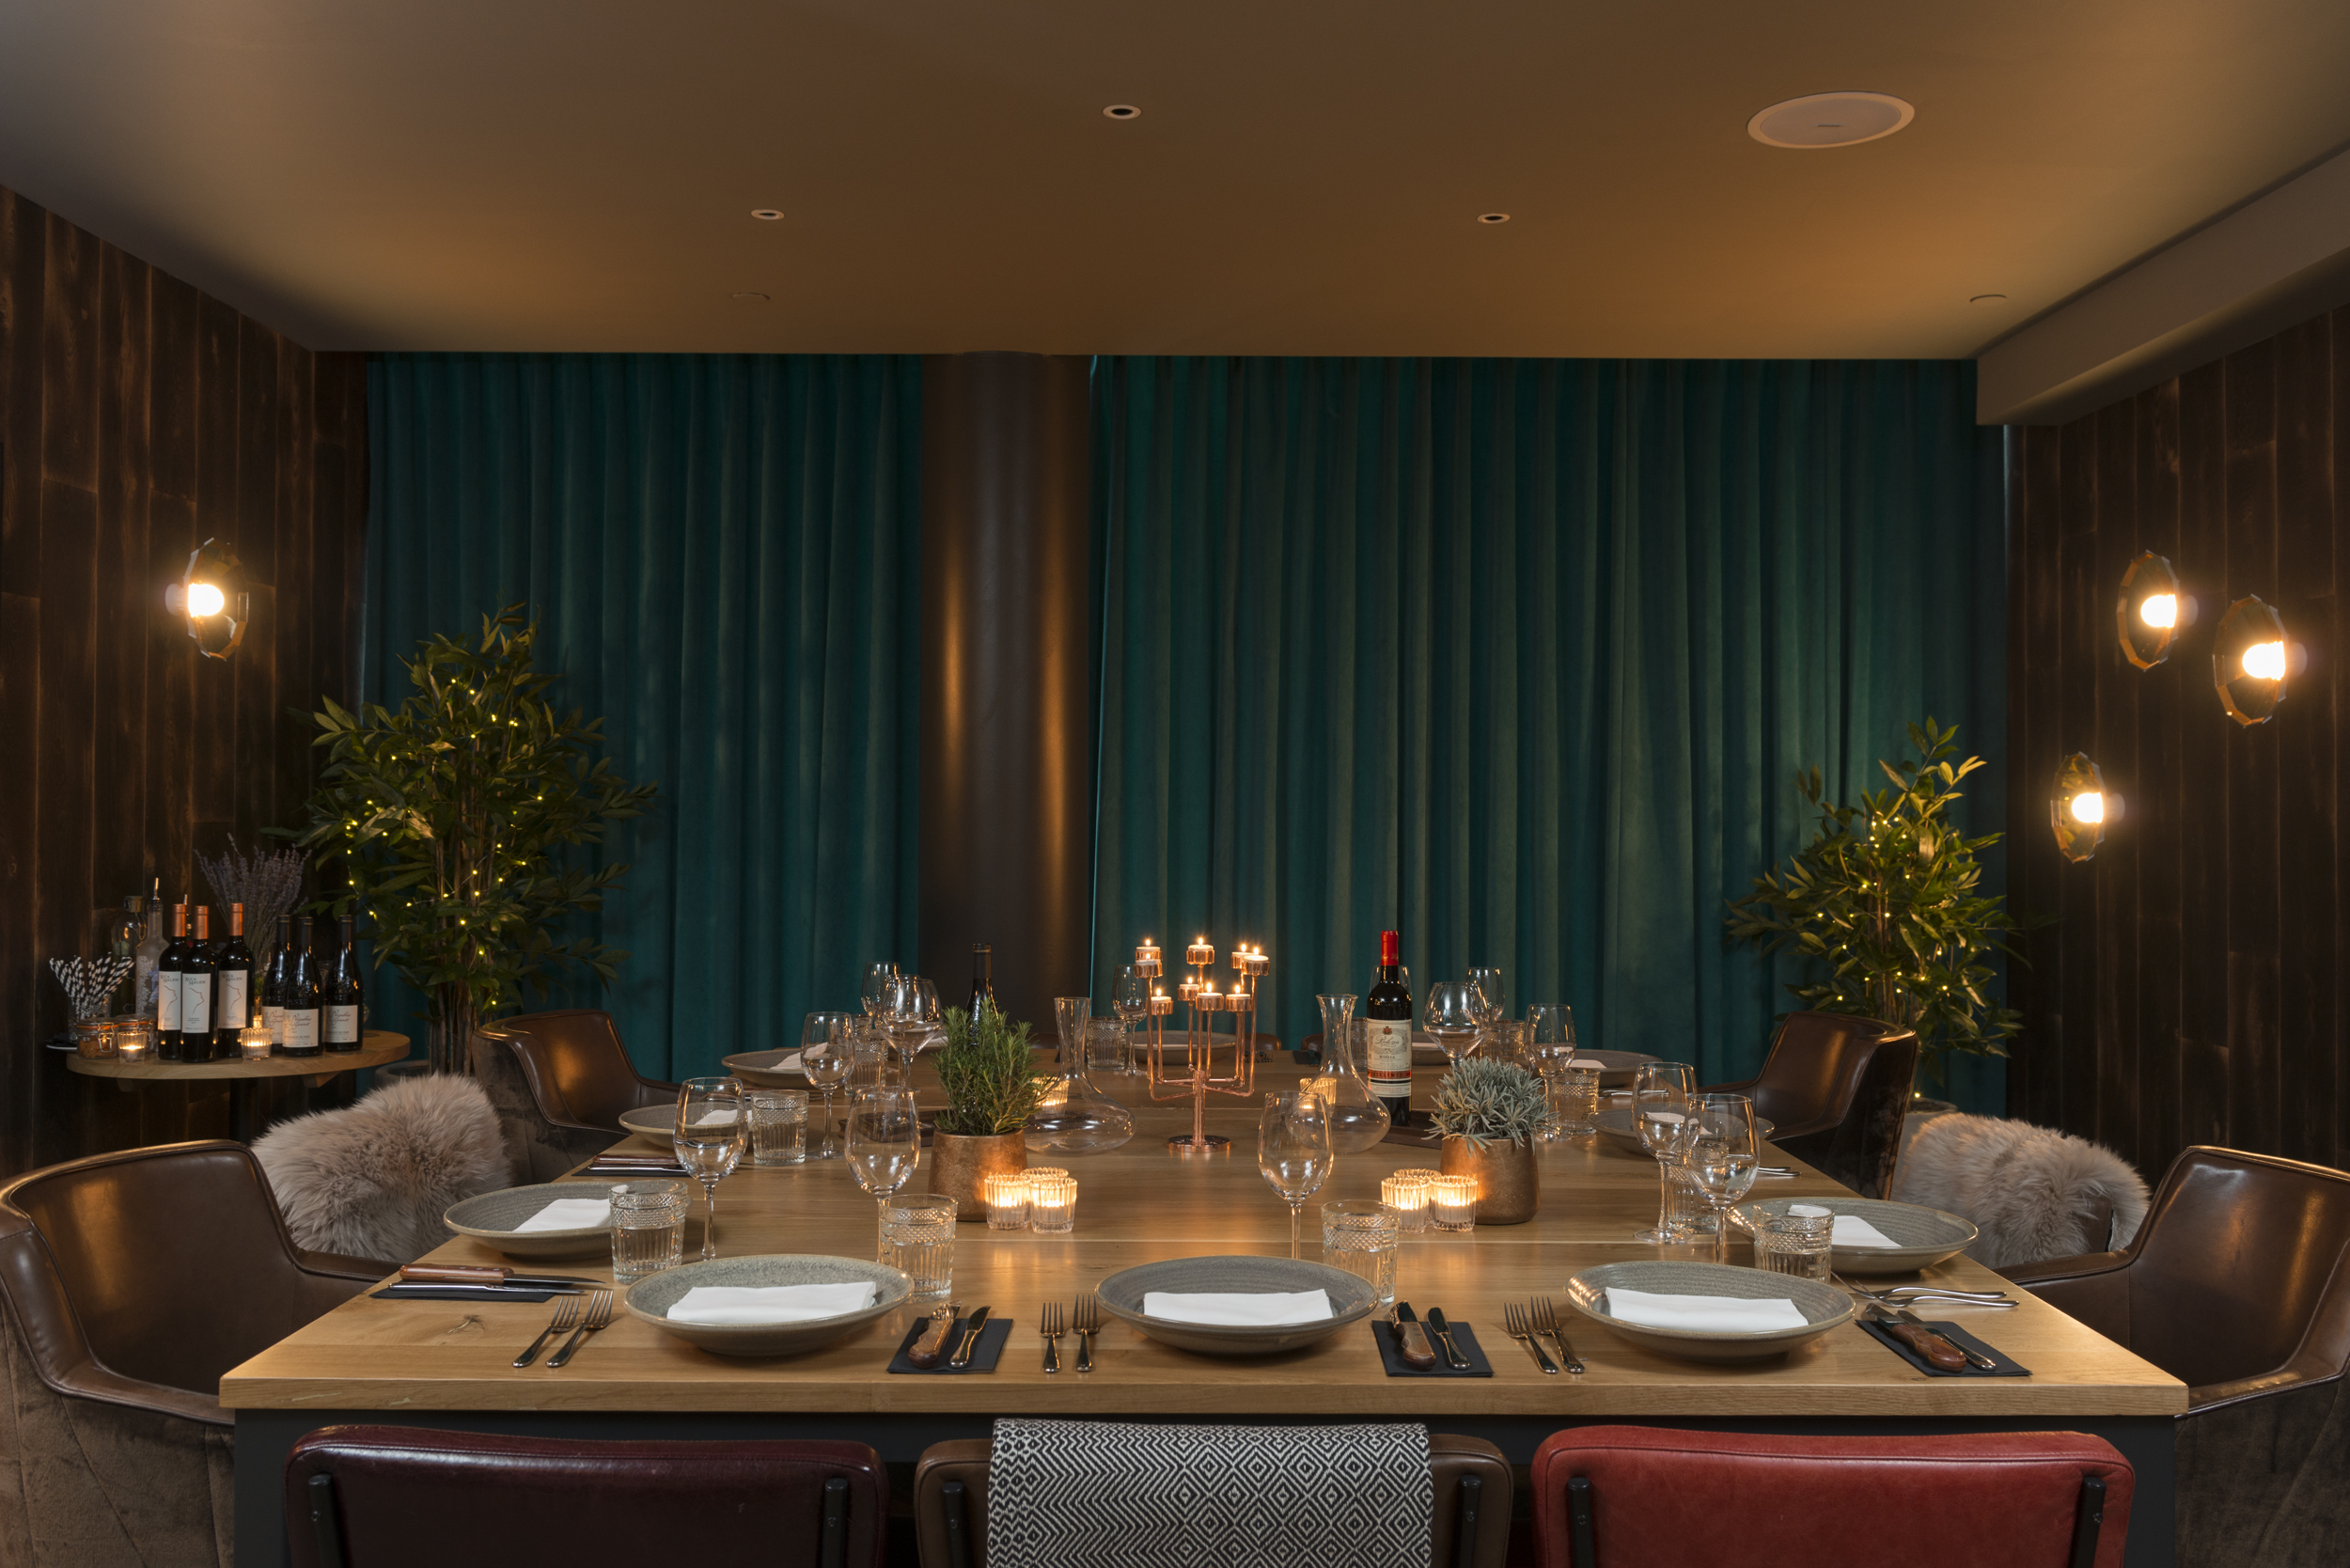 https://www.drakeandmorgan.co.uk/the-refinery-citypoint/wp-content/uploads/sites/66/2022/06/Refinery-CityPoint-private-dining-room.jpg